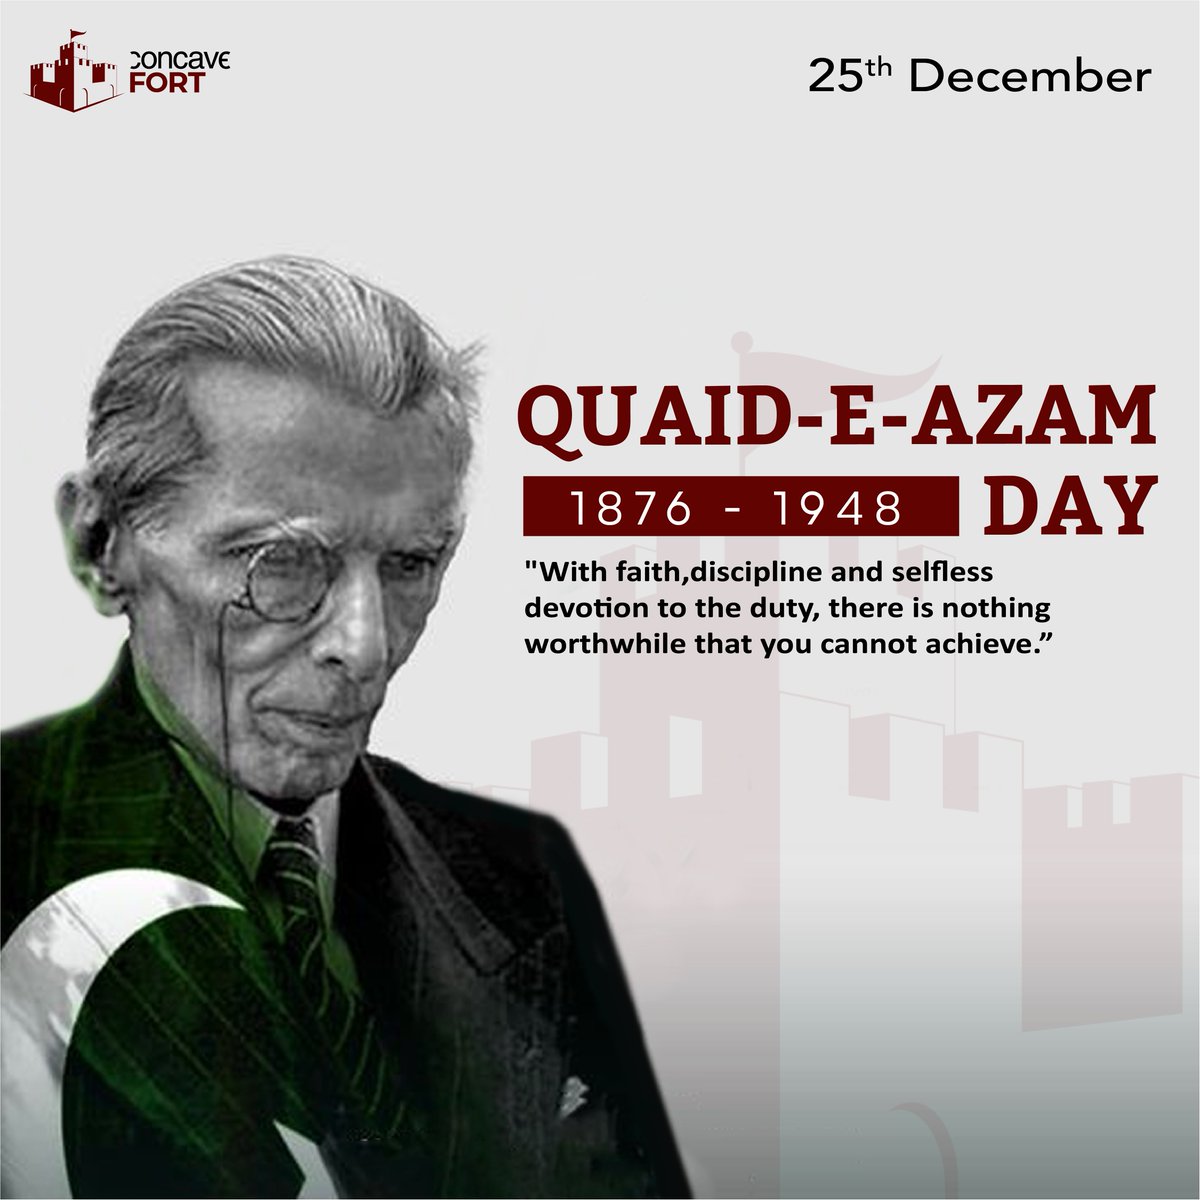 Saluting the vision of Quaid-e-Azam on his day! Just as he envisioned a progressive nation, IT professionals today continue to shape a digital Pakistan. Let's honor his legacy by advancing technology and innovation.💻 

#QuaidDay #DigitalPakistan #ITInnovation #TechForProgress